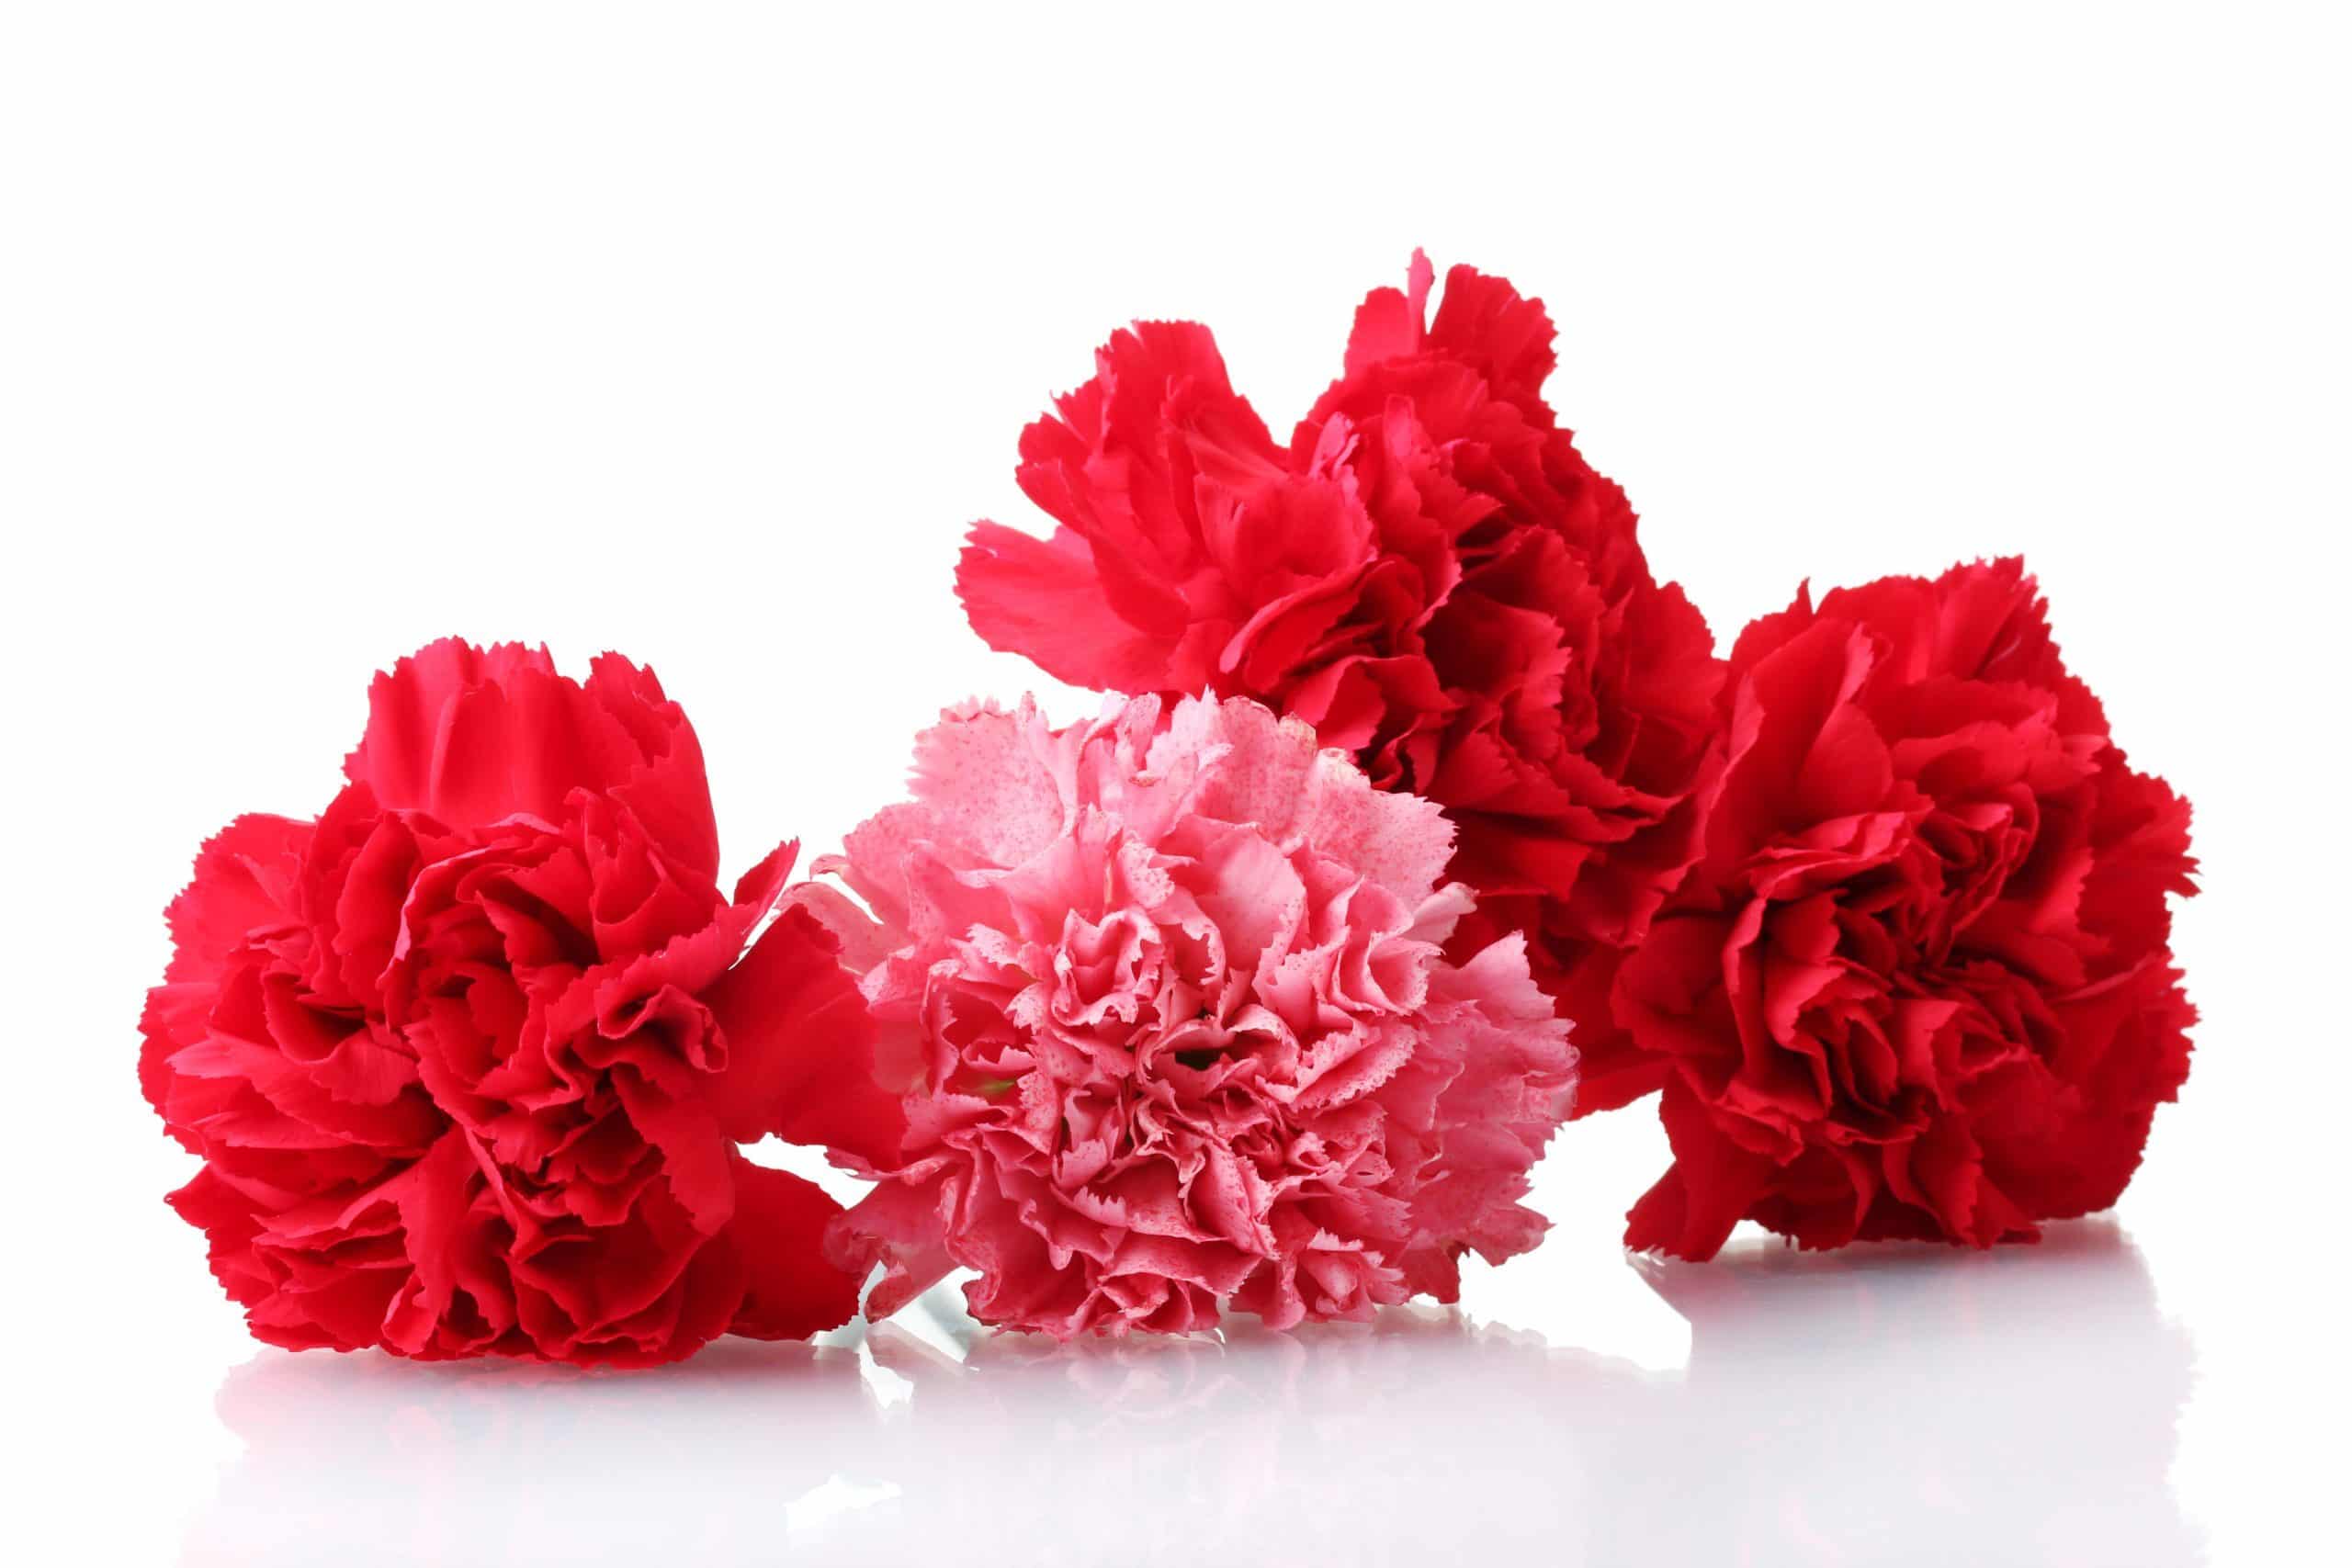 Bouquet of carnations isolated on white